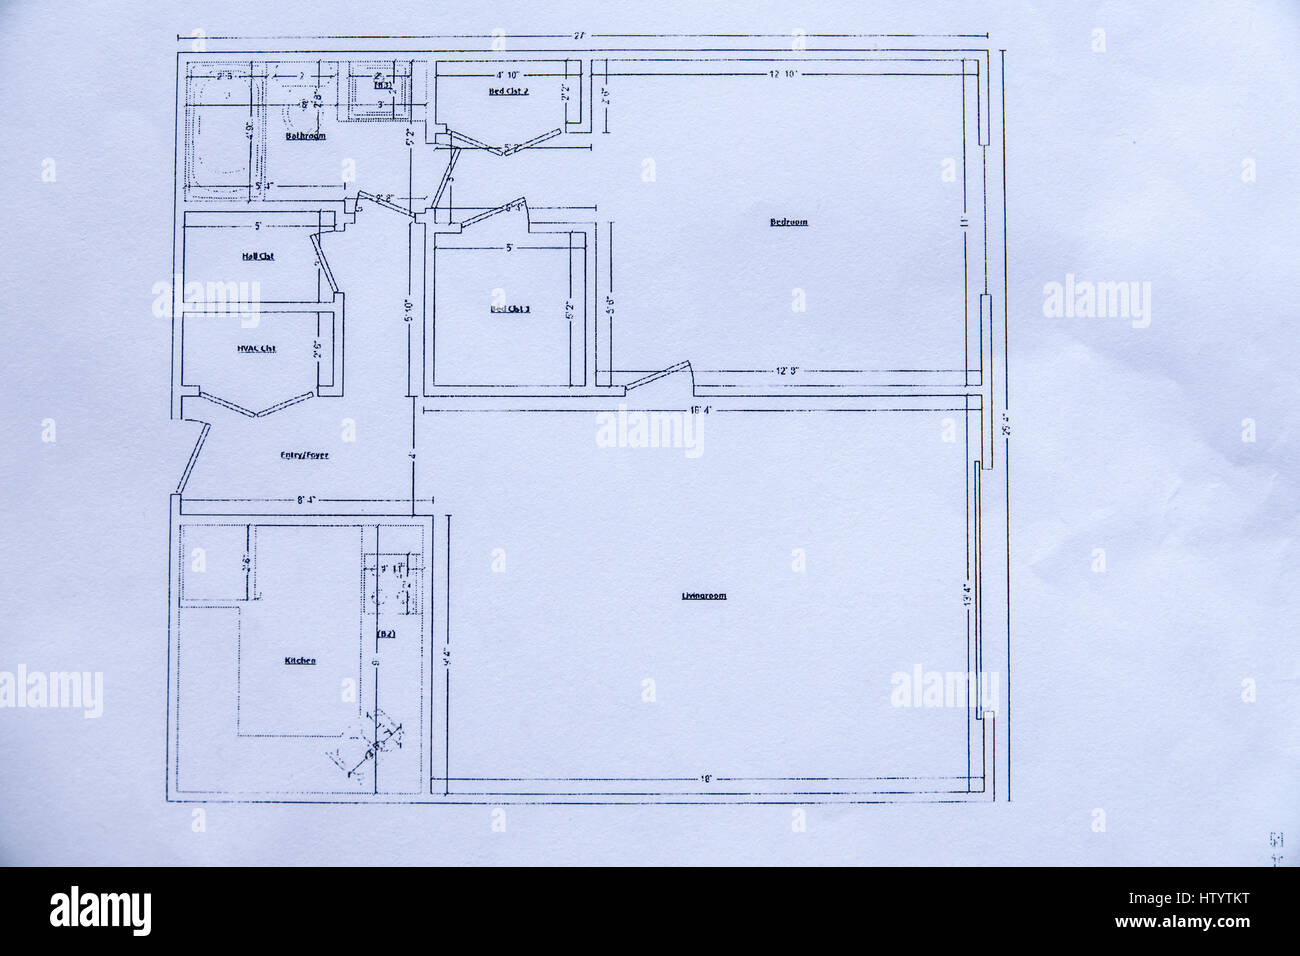 Miami Beach Florida,architecture,floor plan,drawing to scale,dimensions,residential,apartment,FL170122013 Stock Photo